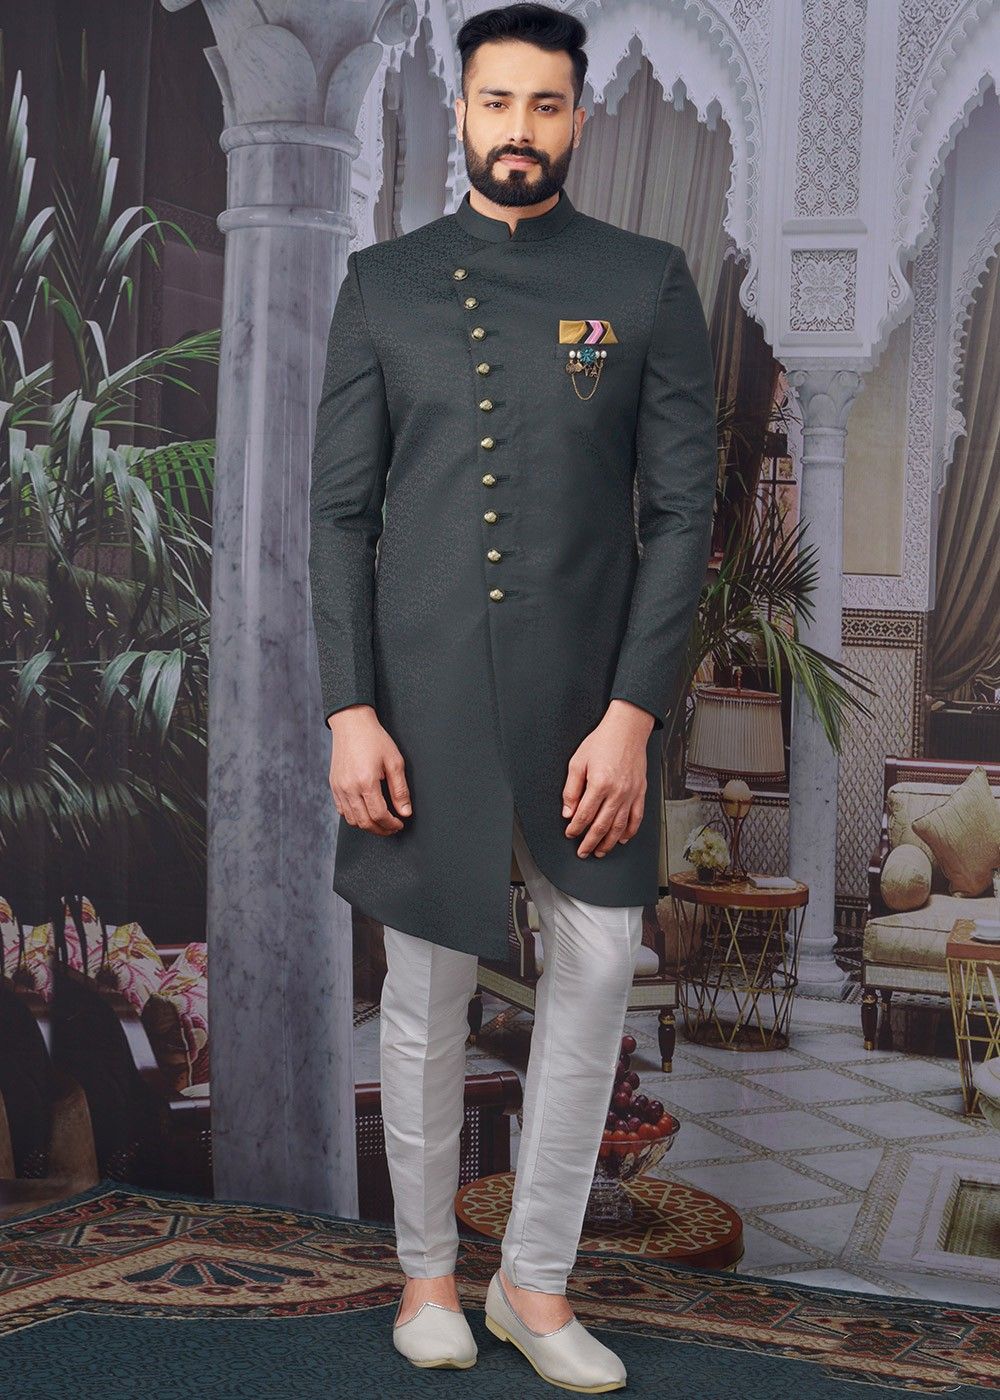 5 Marriage Sherwani Styles to Look out for This Wedding Season